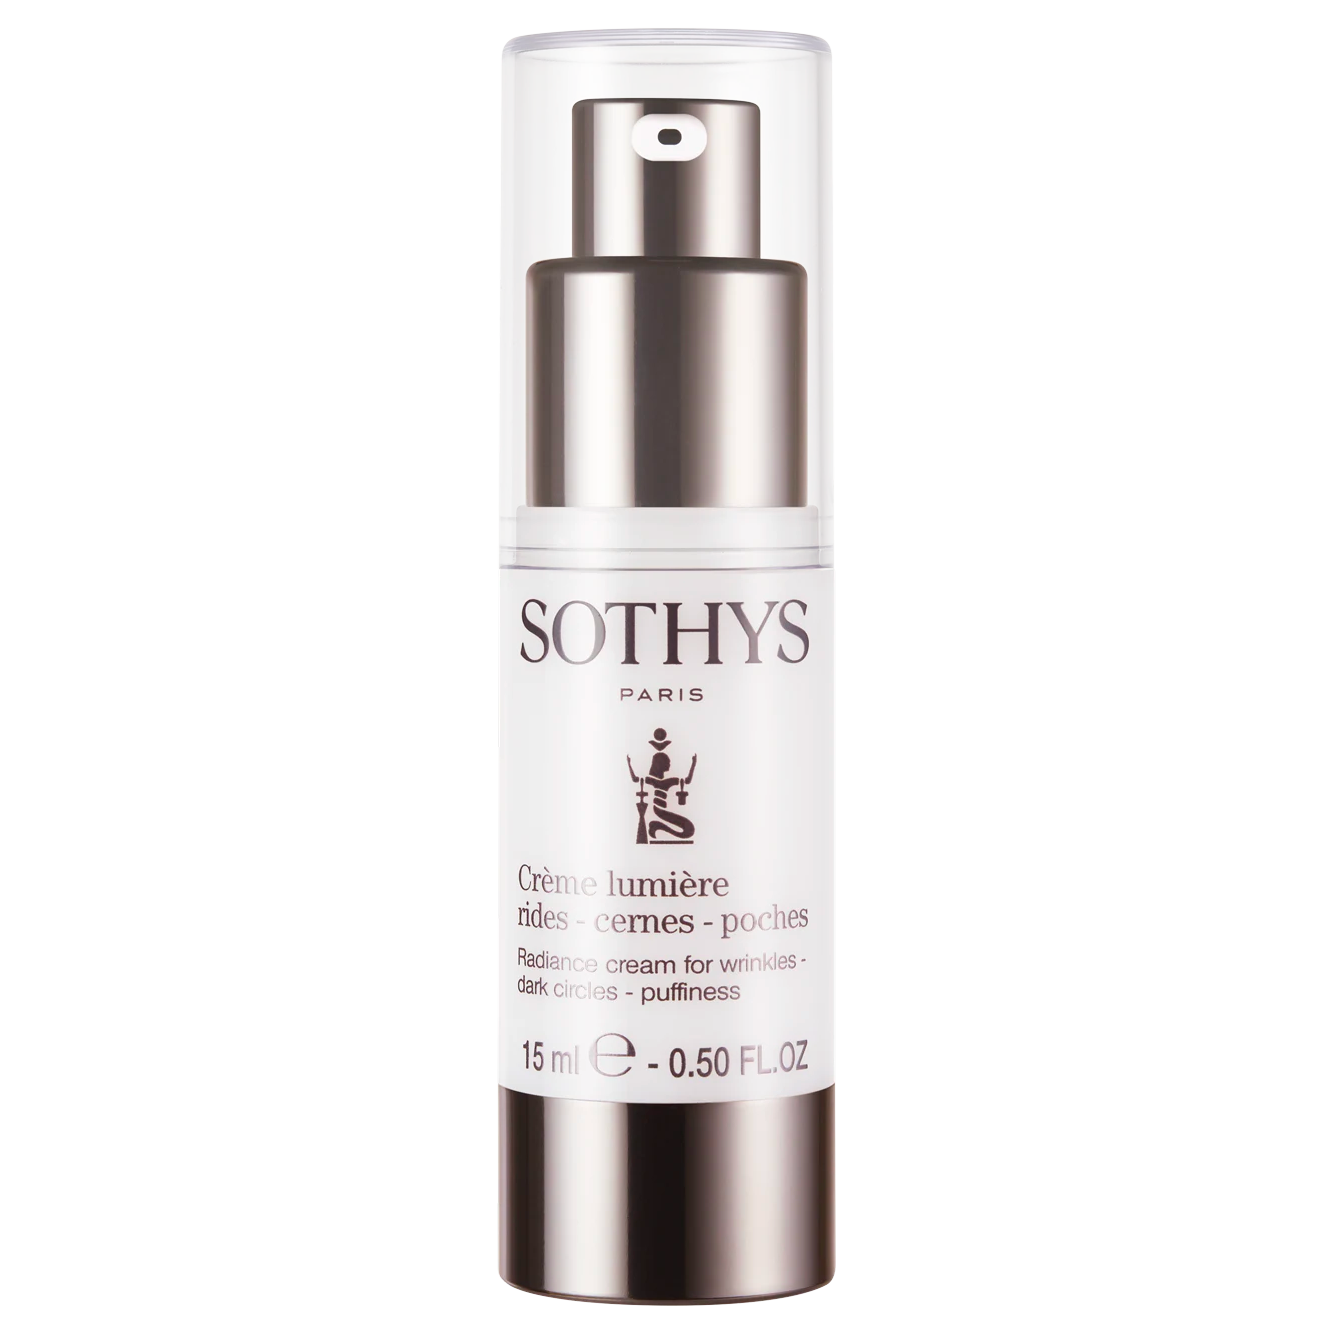 Sothys Radiance Eye Cream for wrinkles-dark circles-puffiness